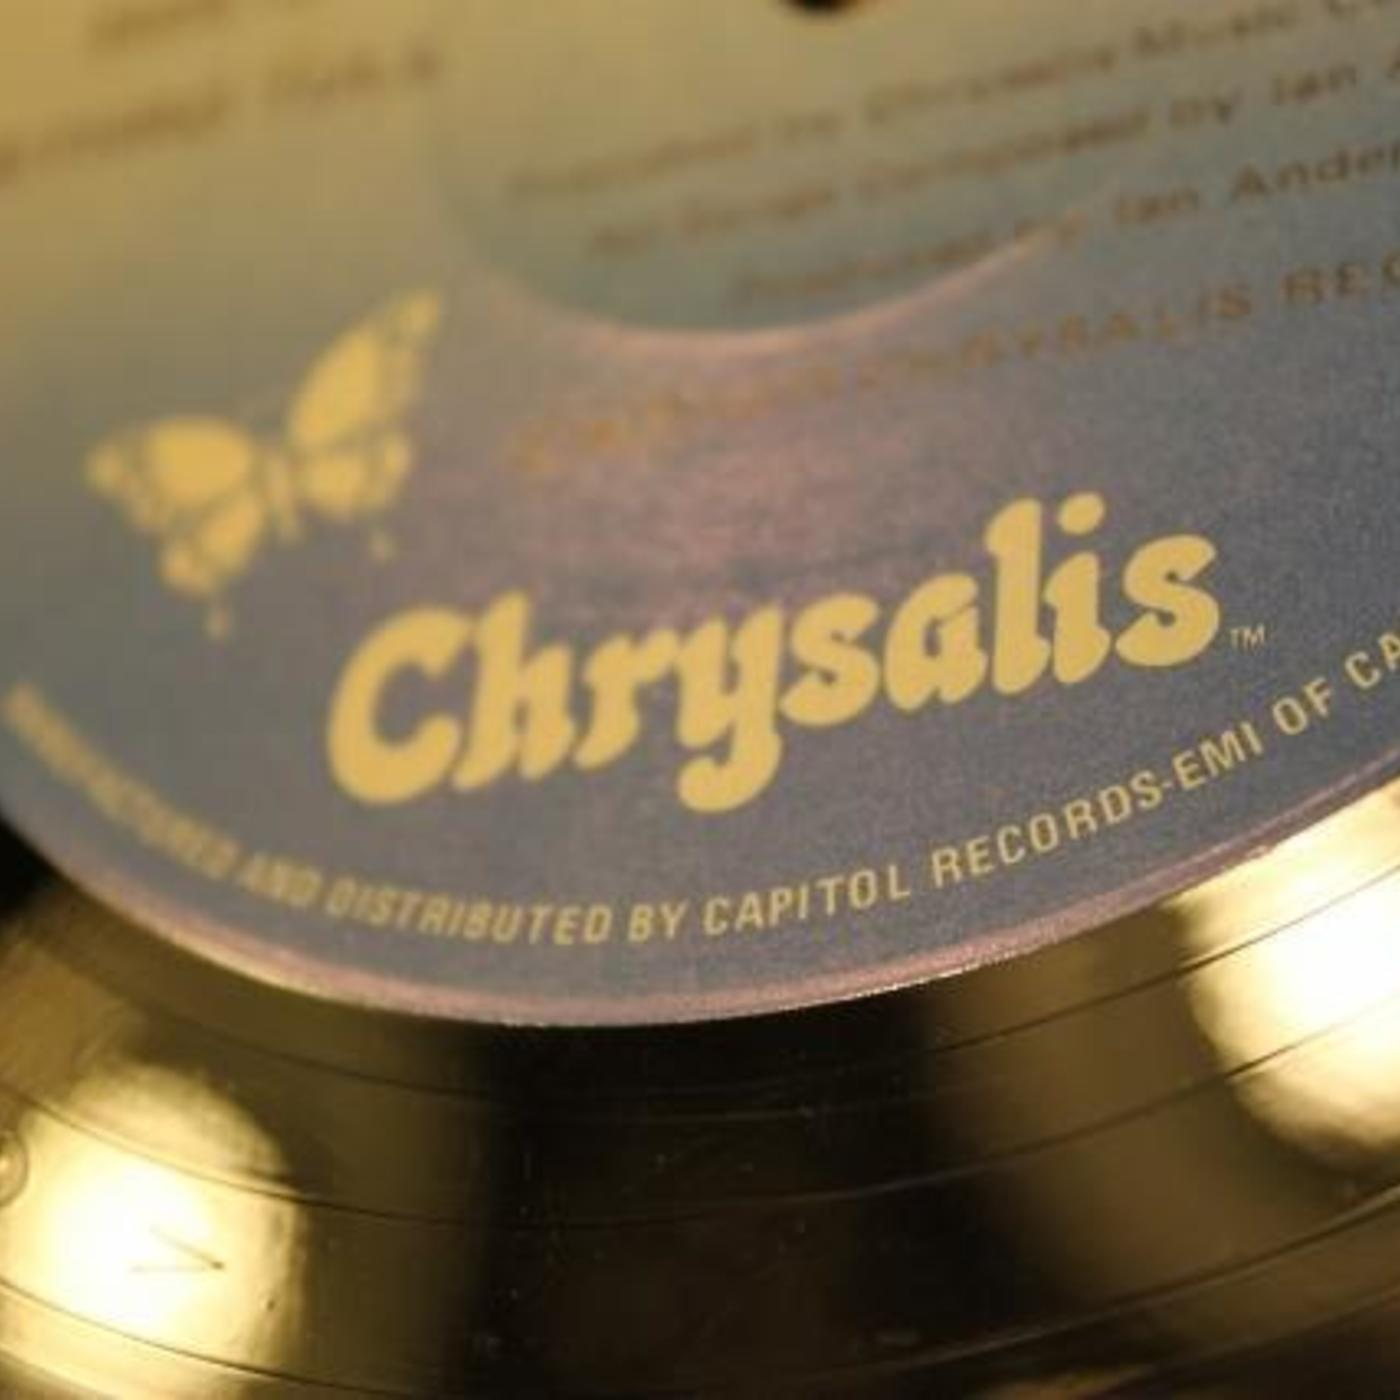 59. Chrysalis Records founder Chris Wright on business, big mistakes and Bowie